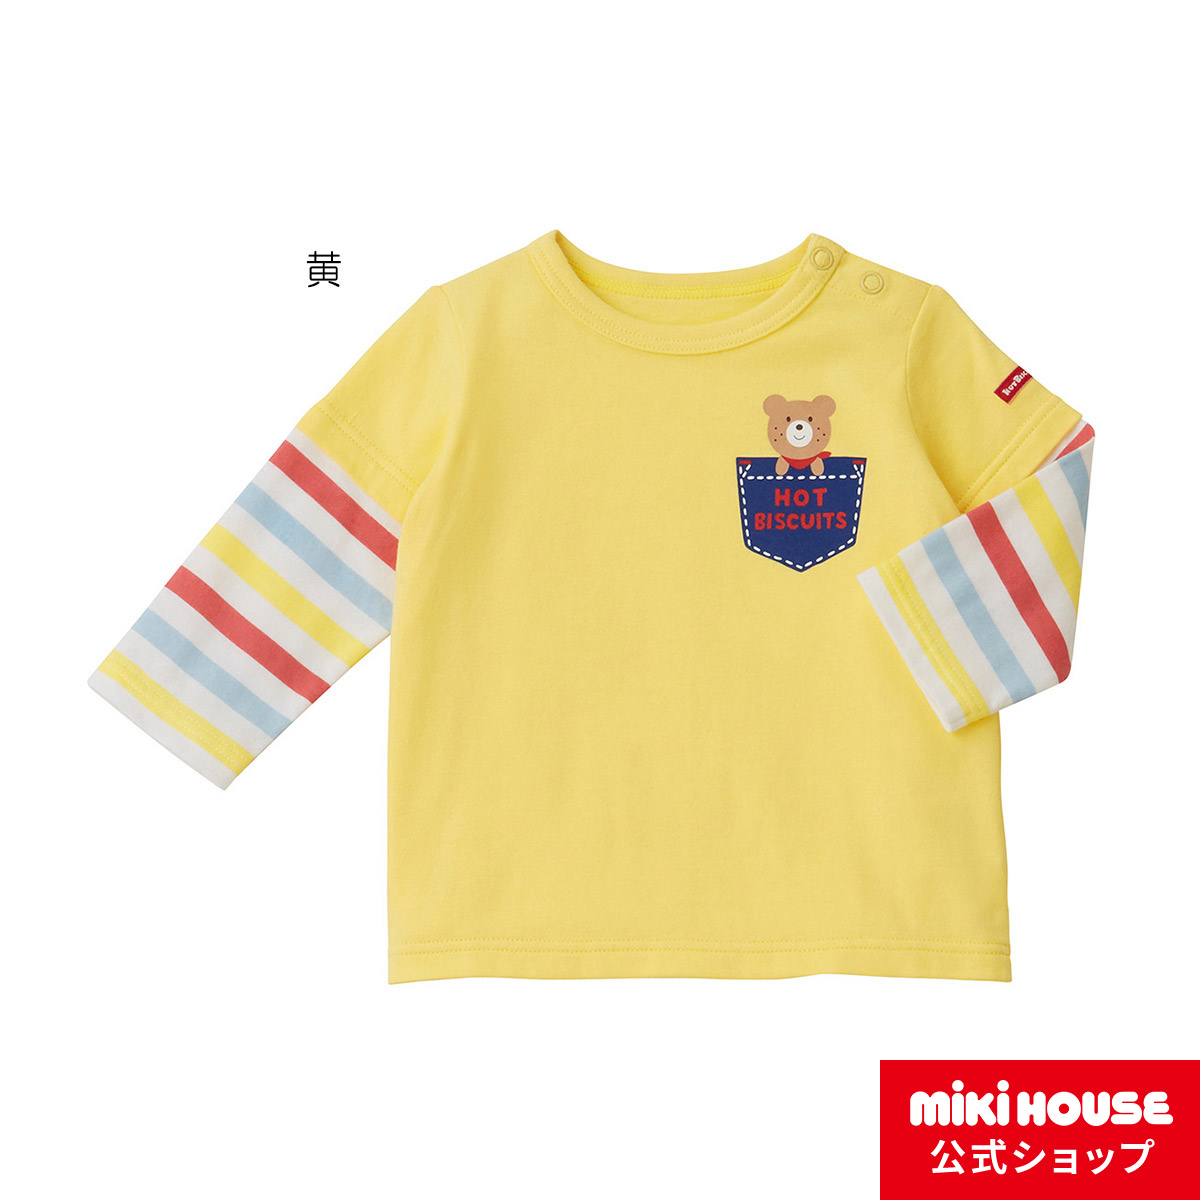 SALE／65%OFF】 MIKI HOUSE DOUBLE.B HOT BISCUITS 110サイズ